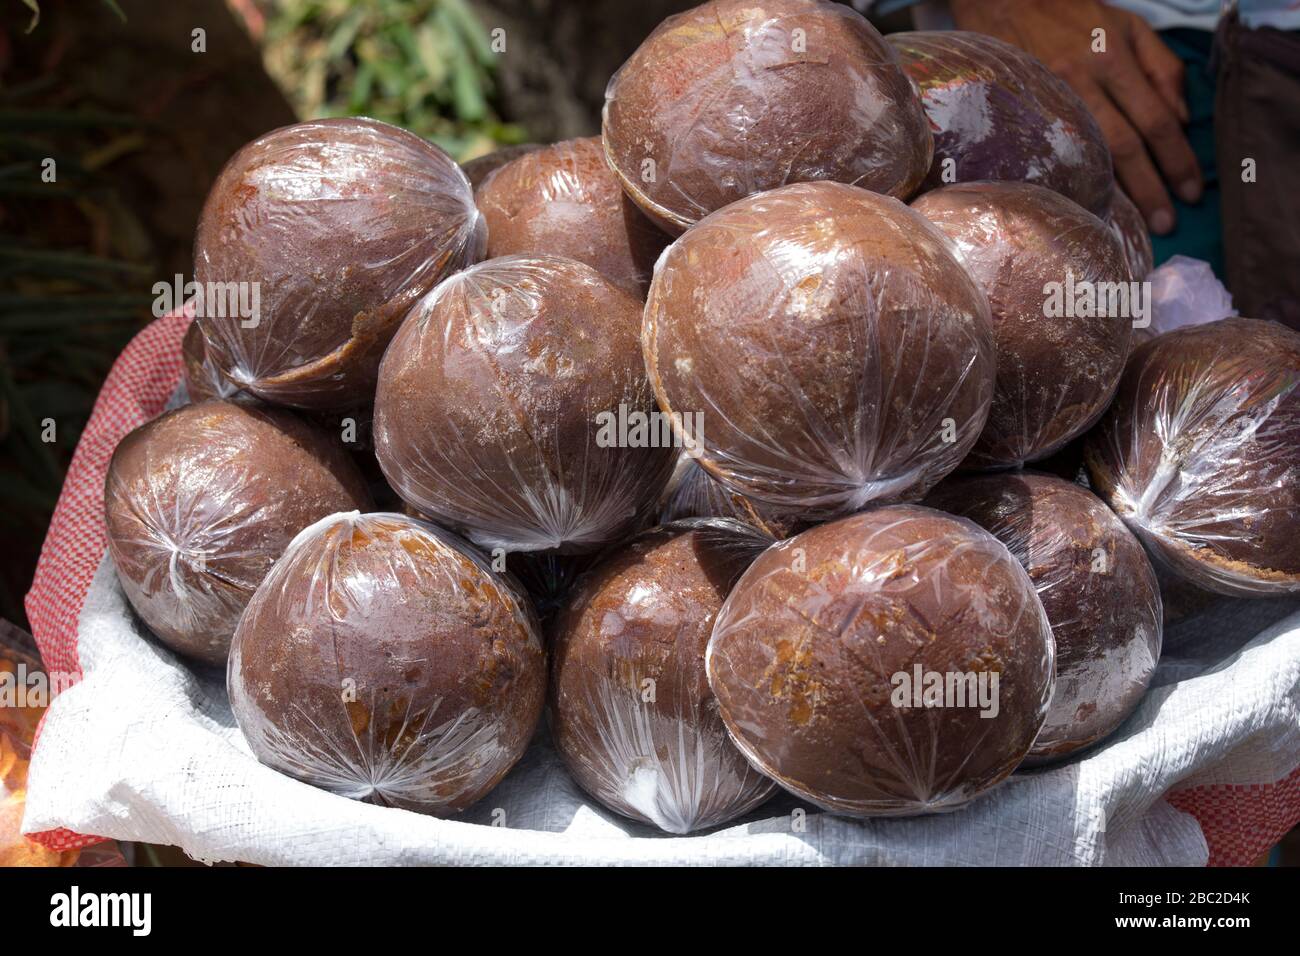 A ball of palm sugar in Indonesia market Stock Photo